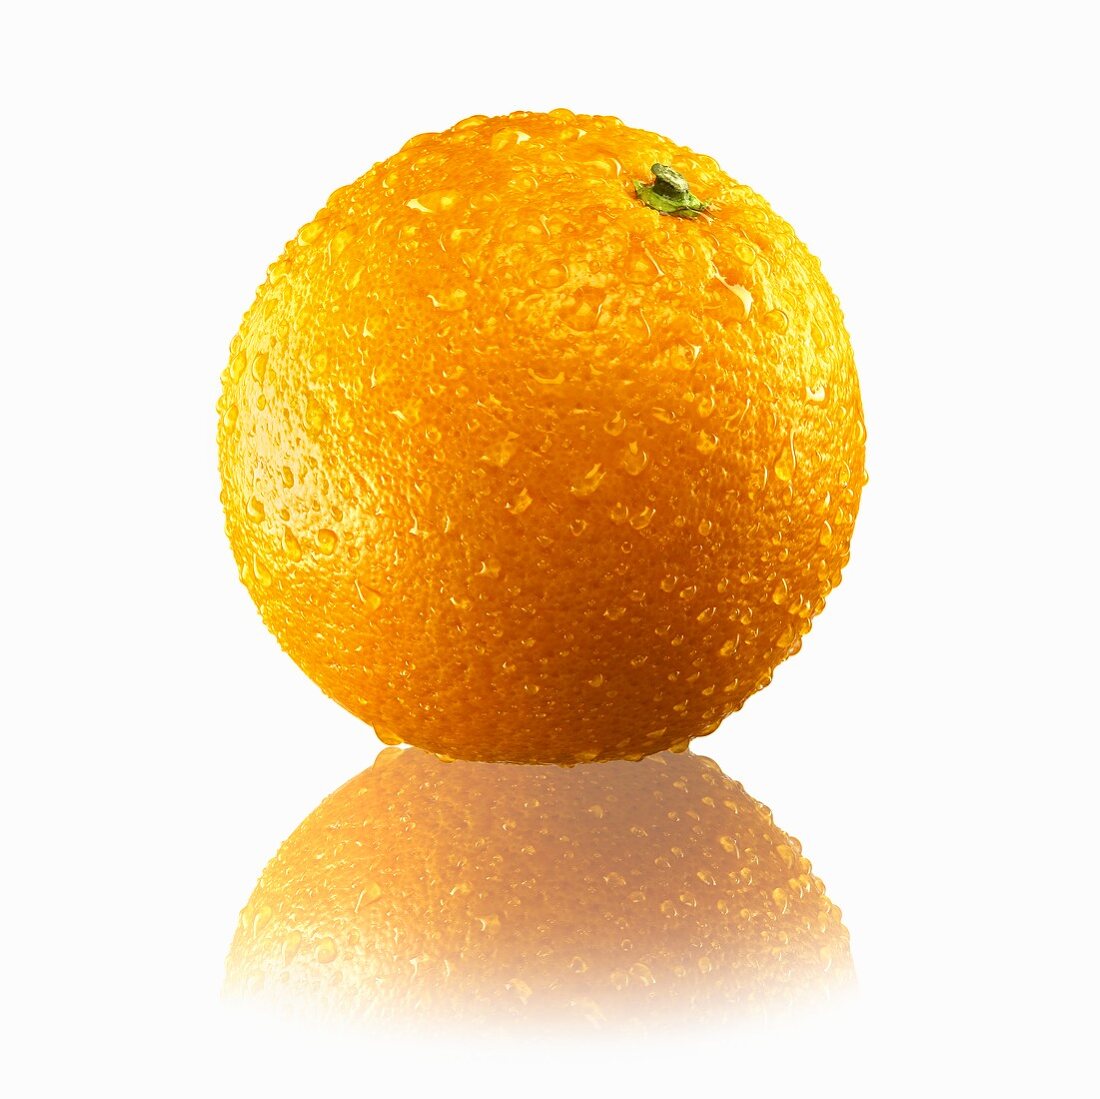 A whole orange with drops of water